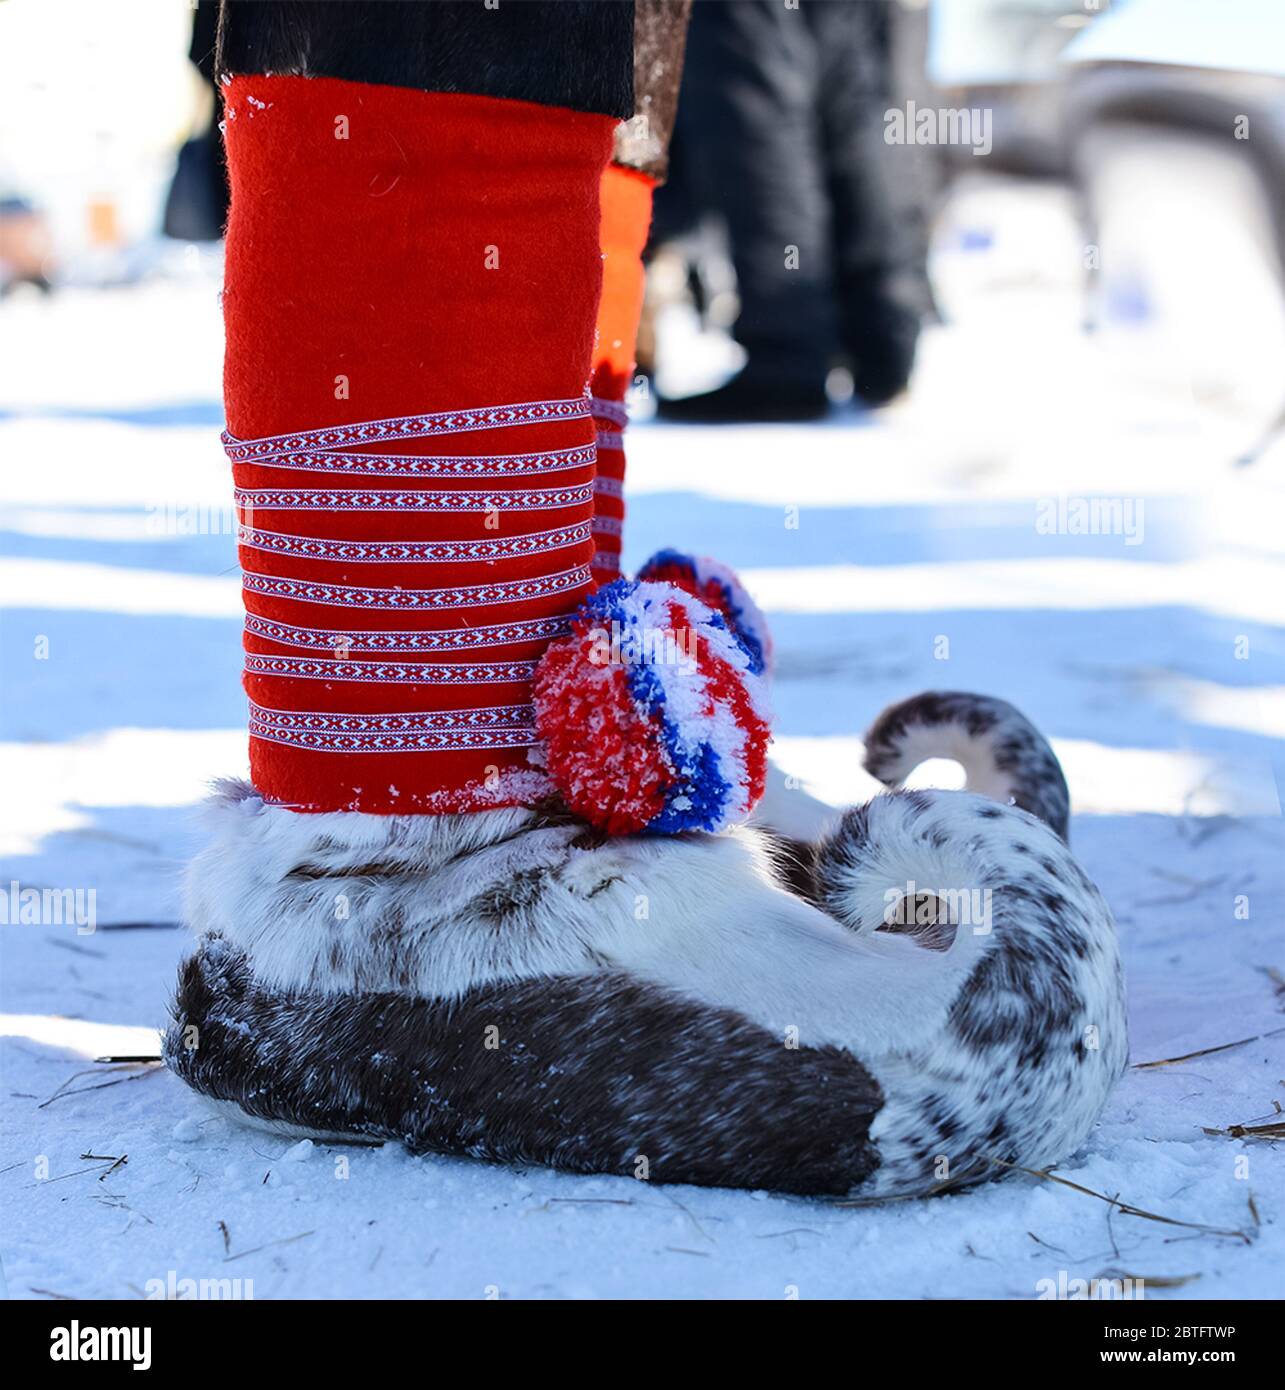 Warm unta Eskimostiefel oder Inuitstiefel shoes. Shoes of the peoples of  the north Stock Photo - Alamy